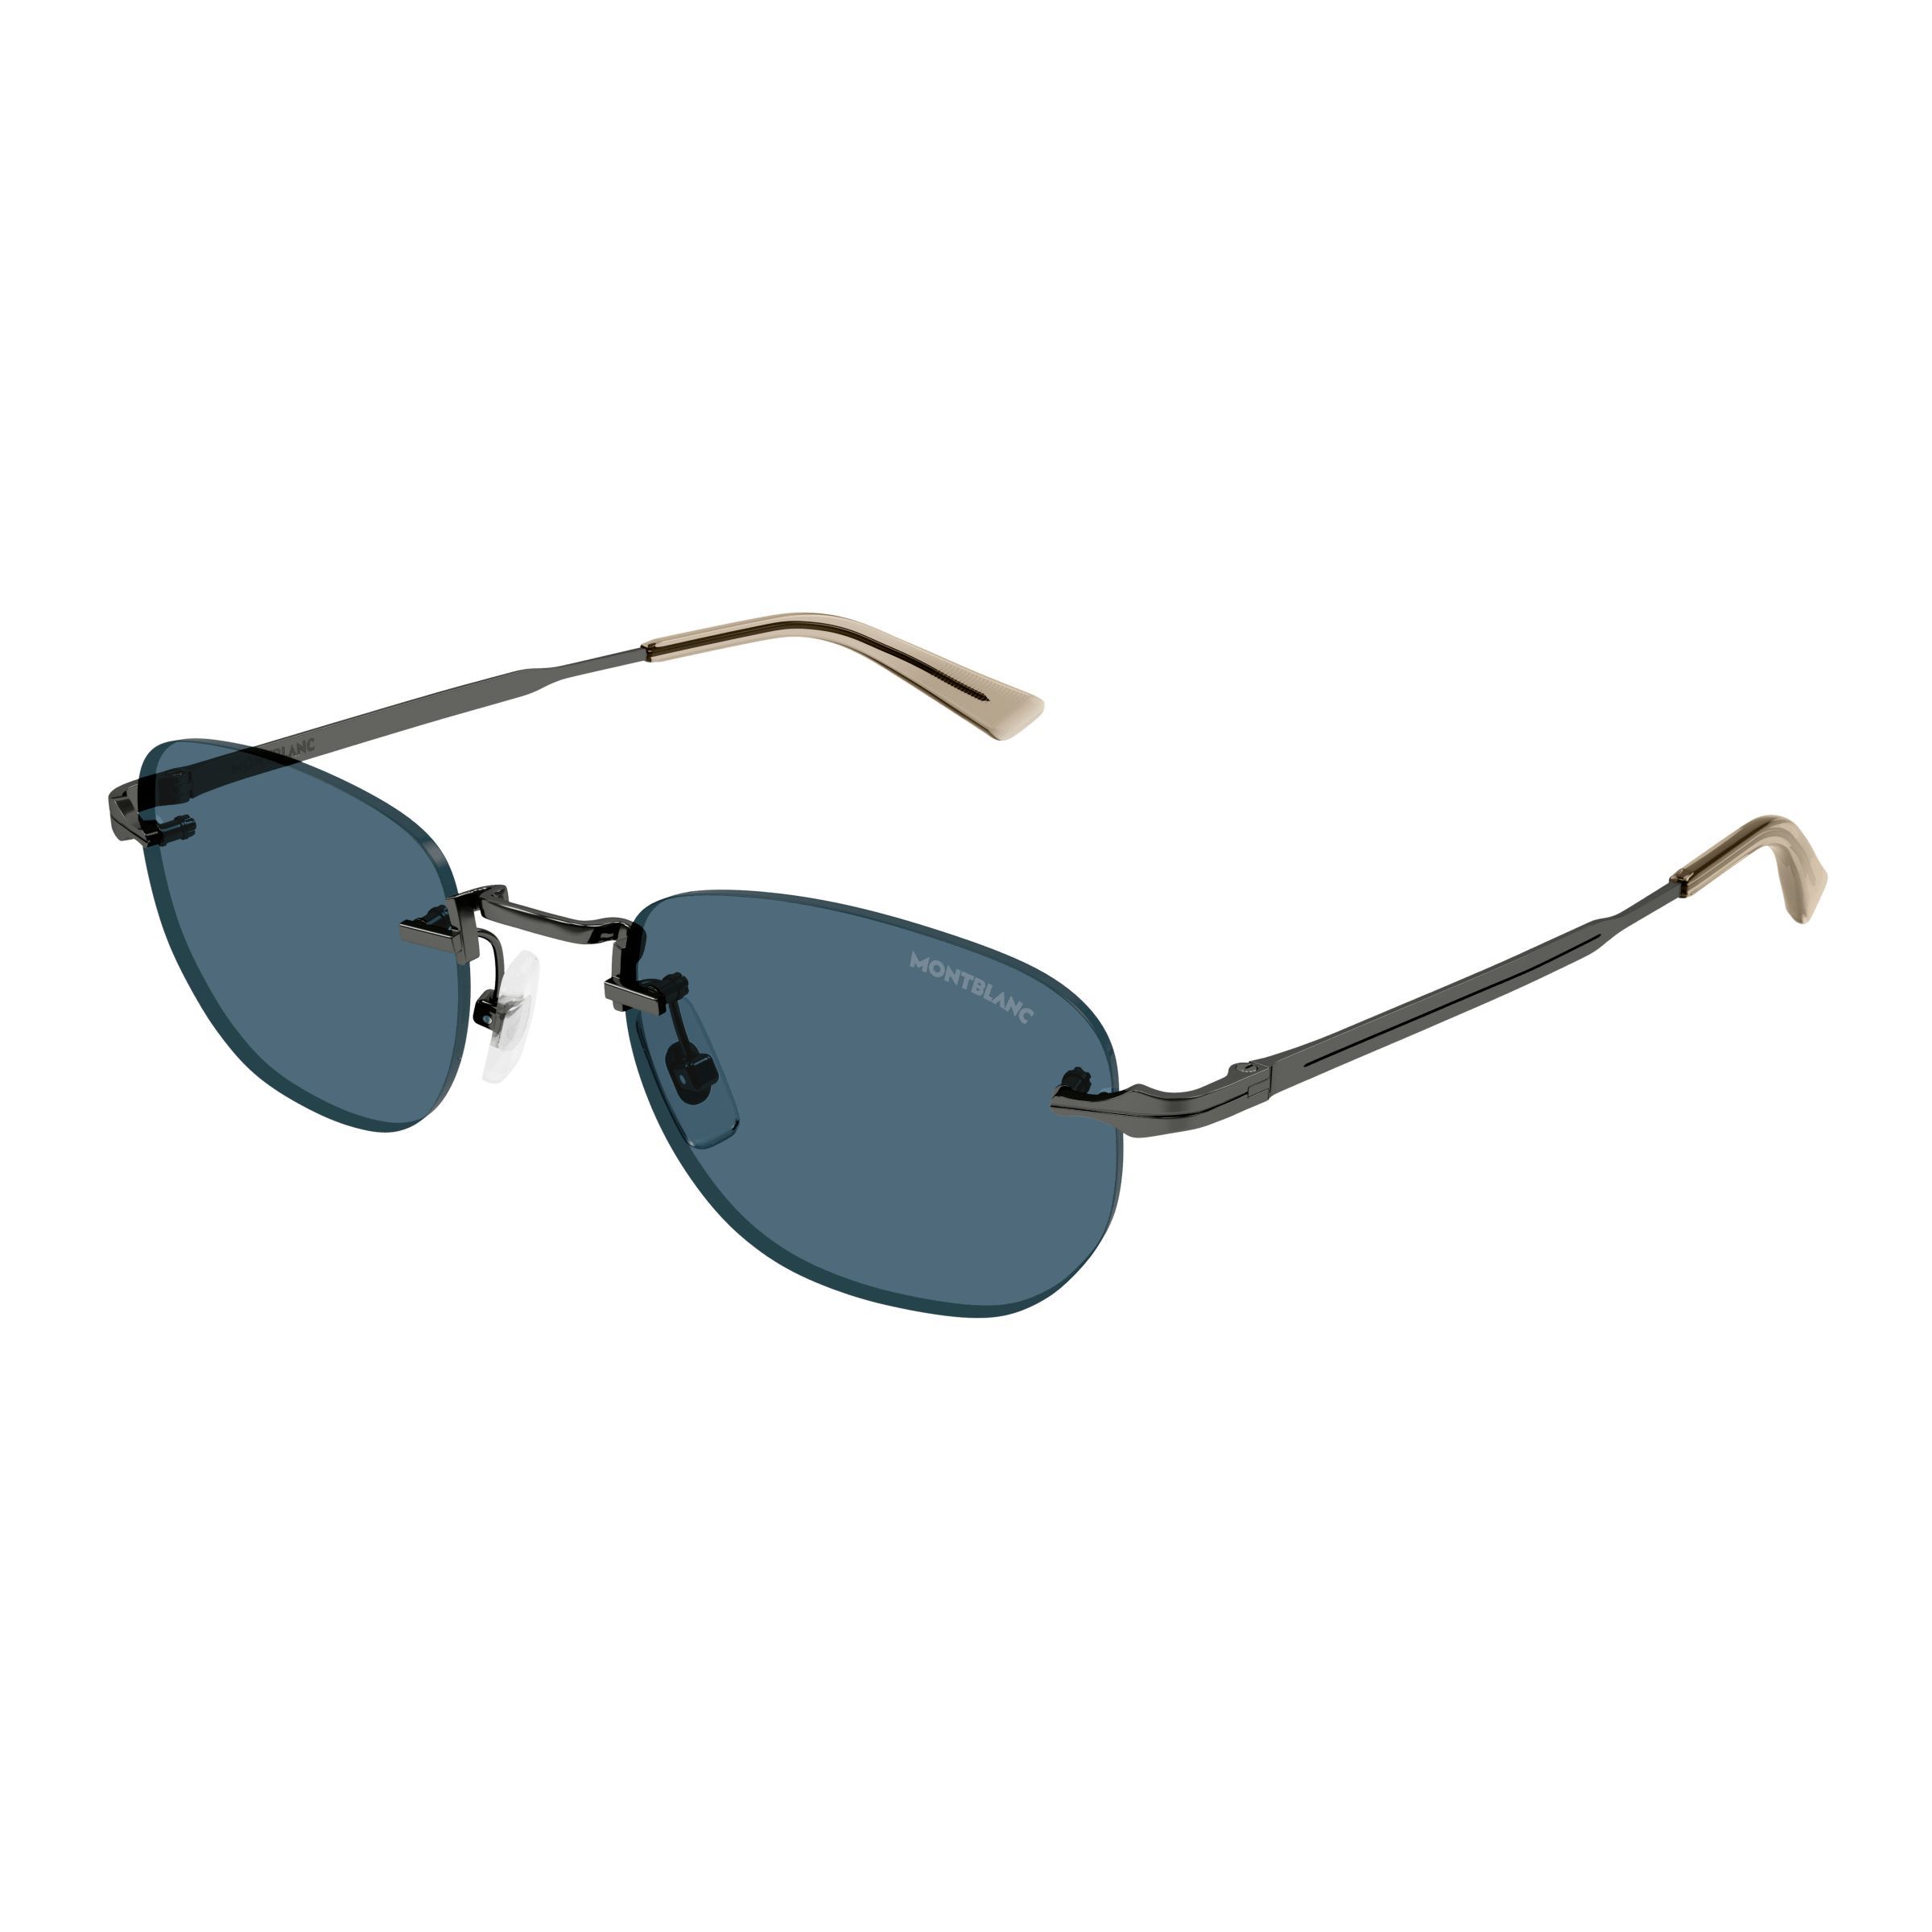 MB0303S Oval Sunglasses 002 - size 53